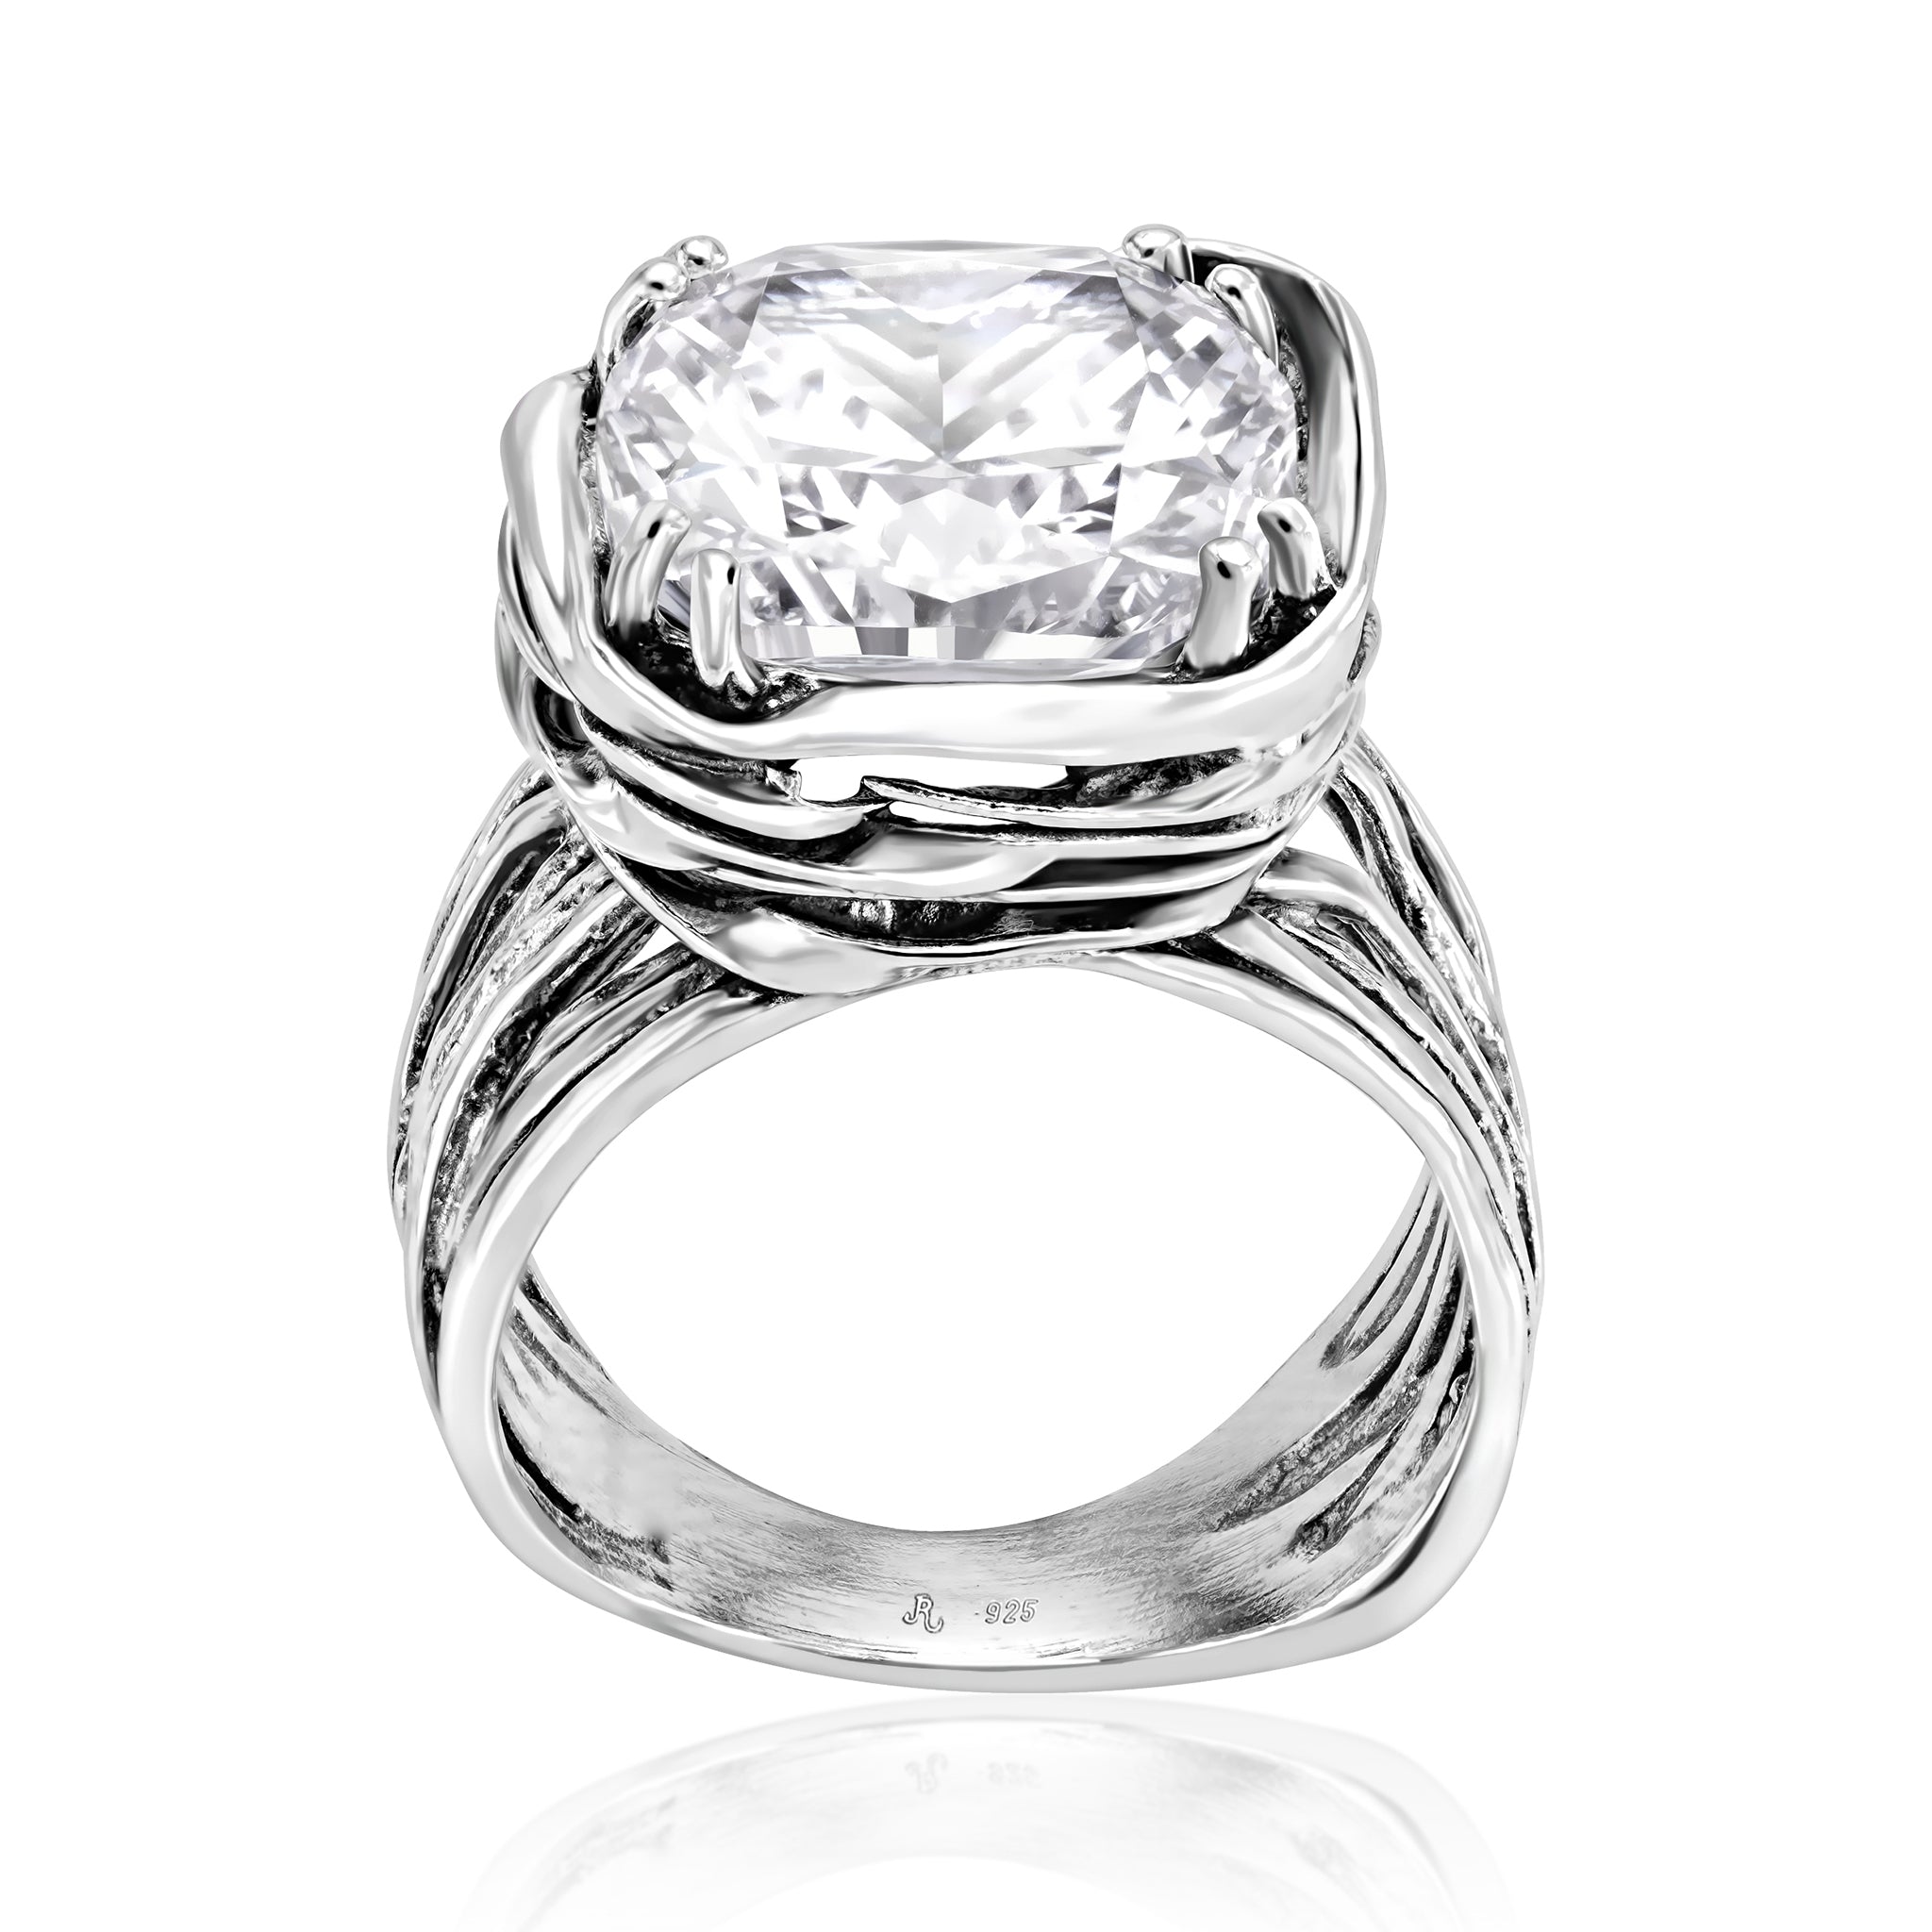 Statement Sterling Silver CZ Wrap Ring